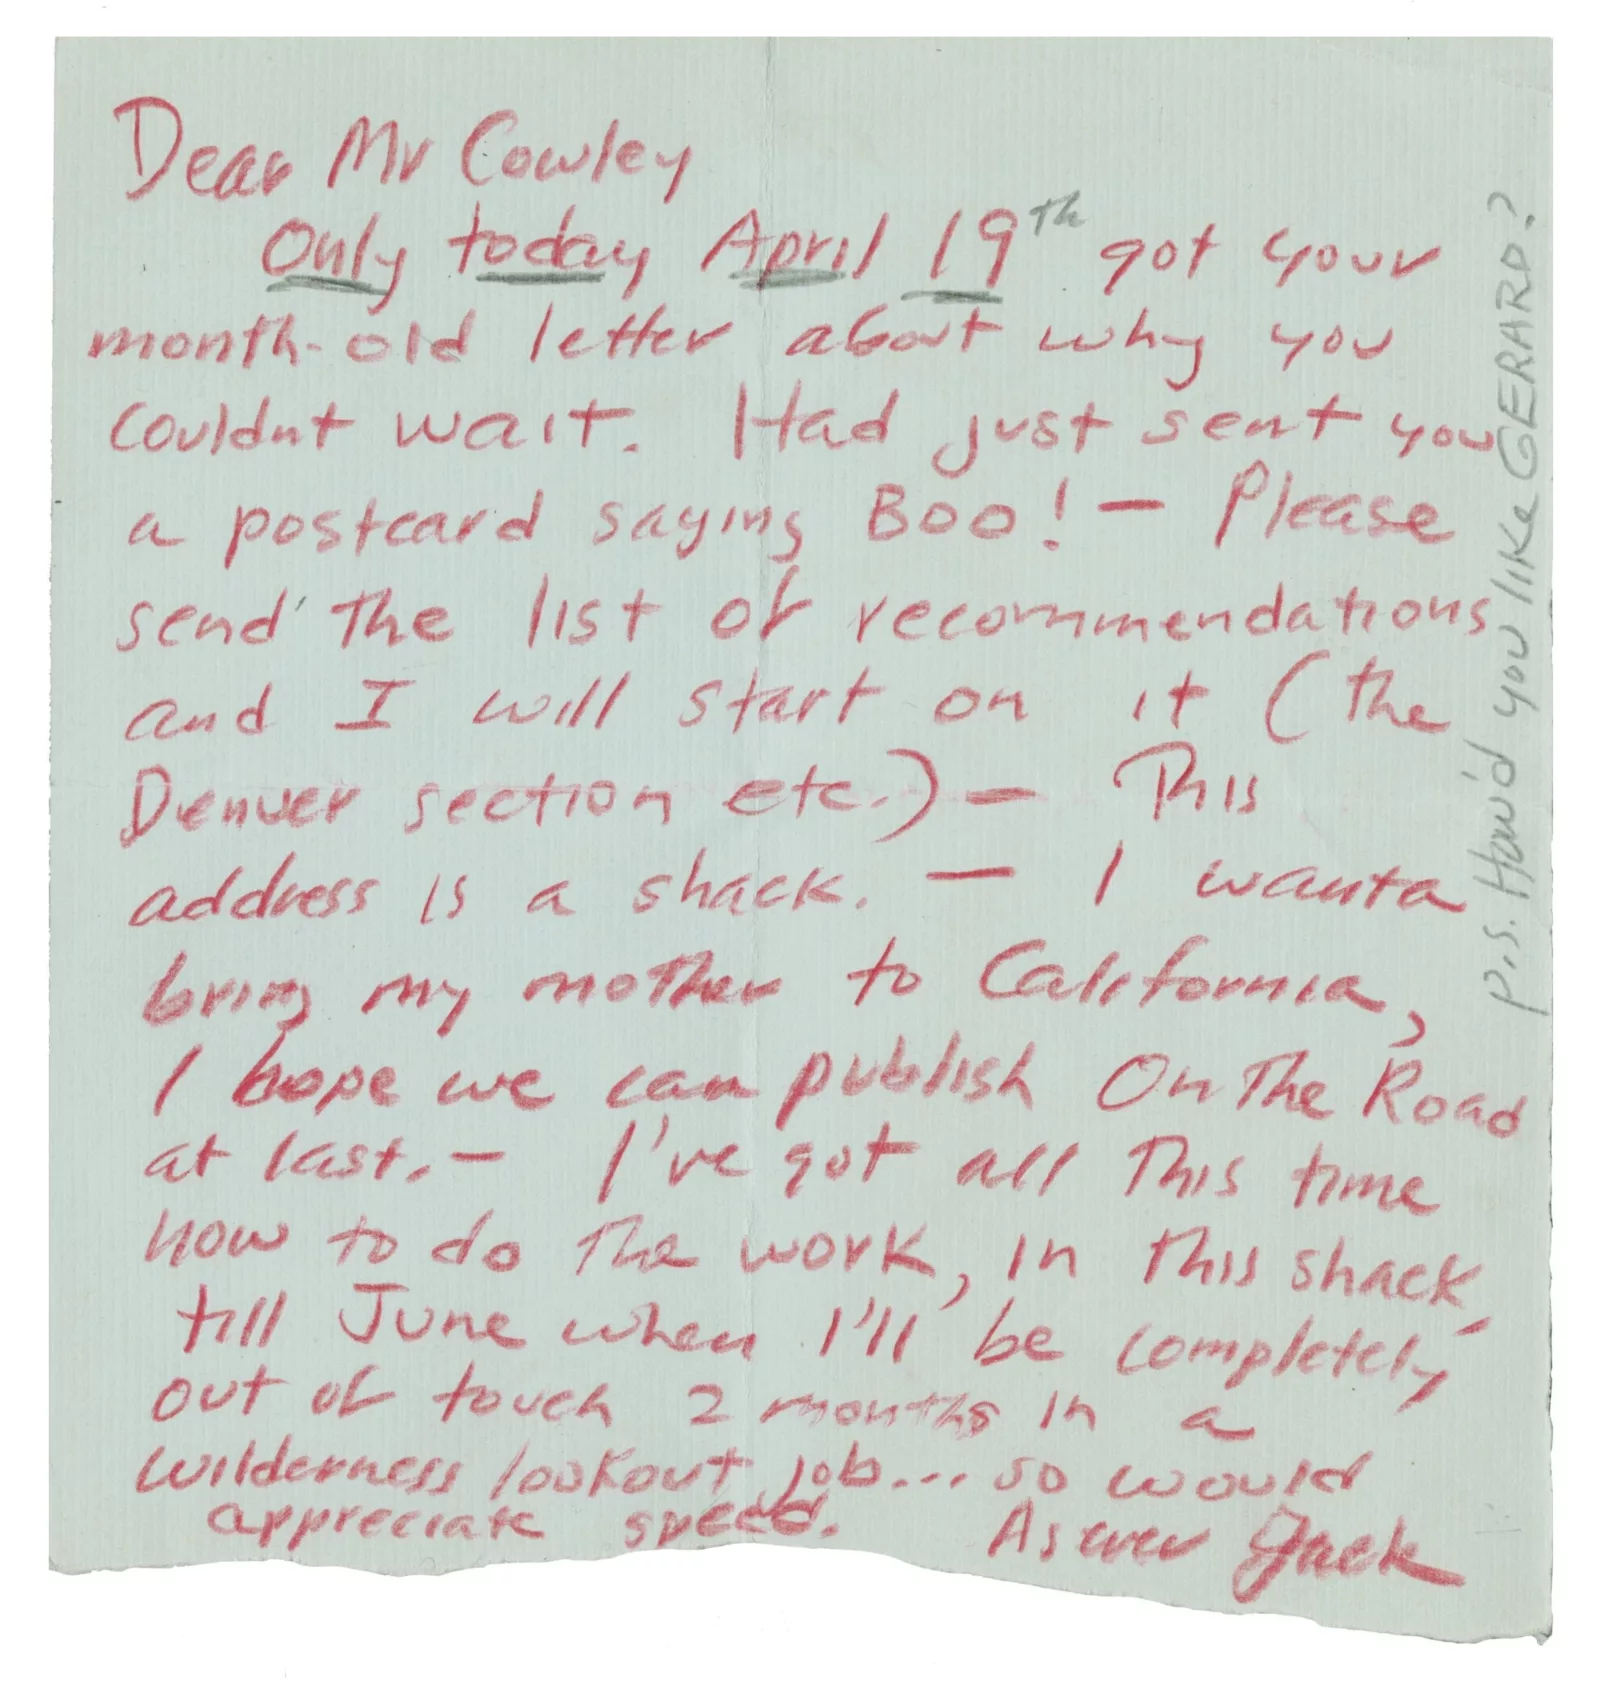 A letter with words written in red pencil. The letter is signed “Jack.”